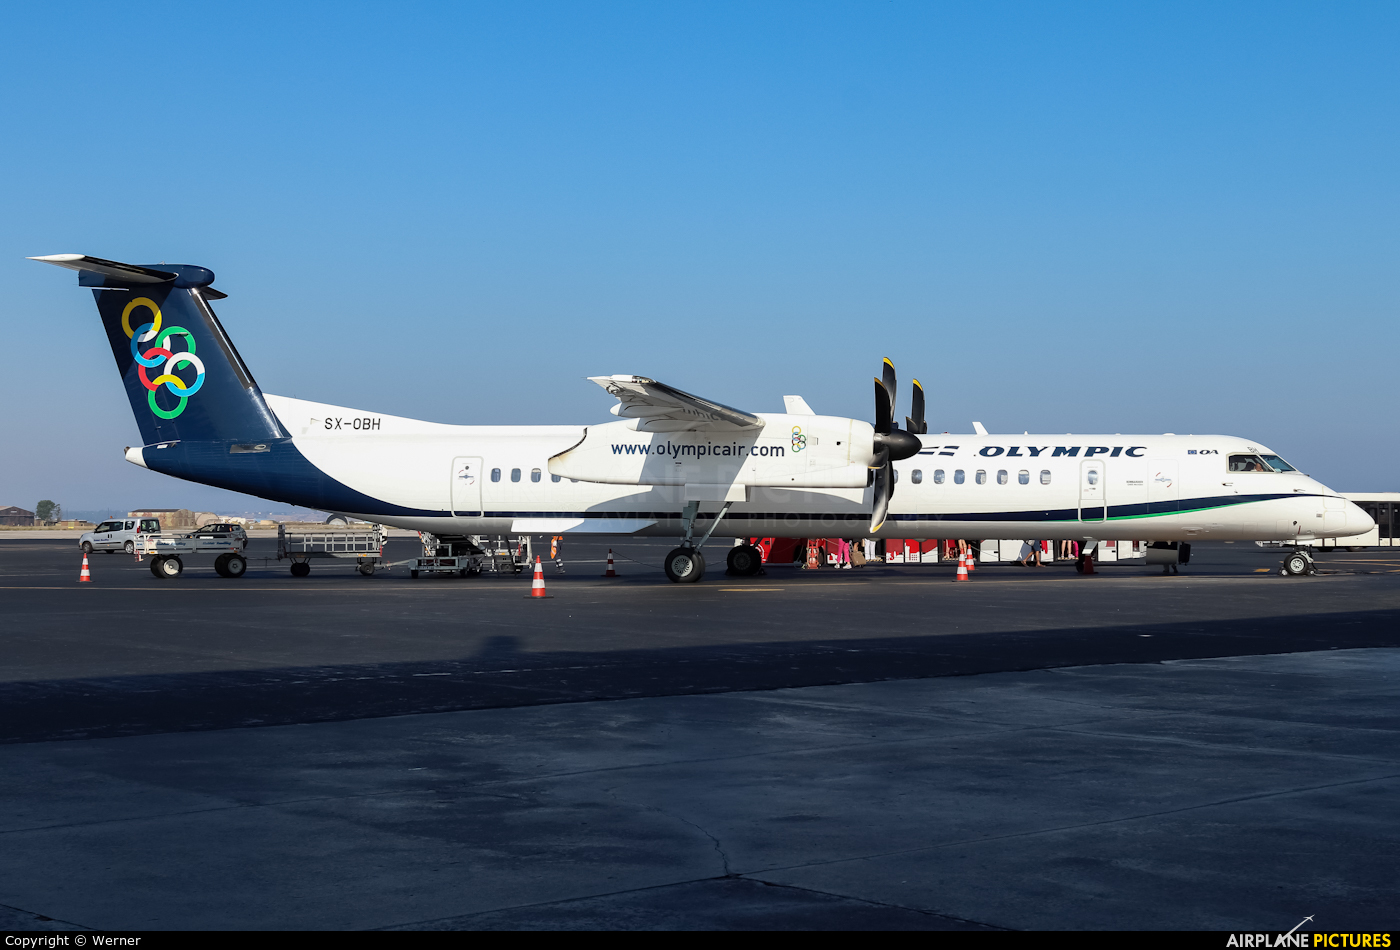 Olympic Airlines SX-OBH aircraft at Thessaloniki - Makedonia